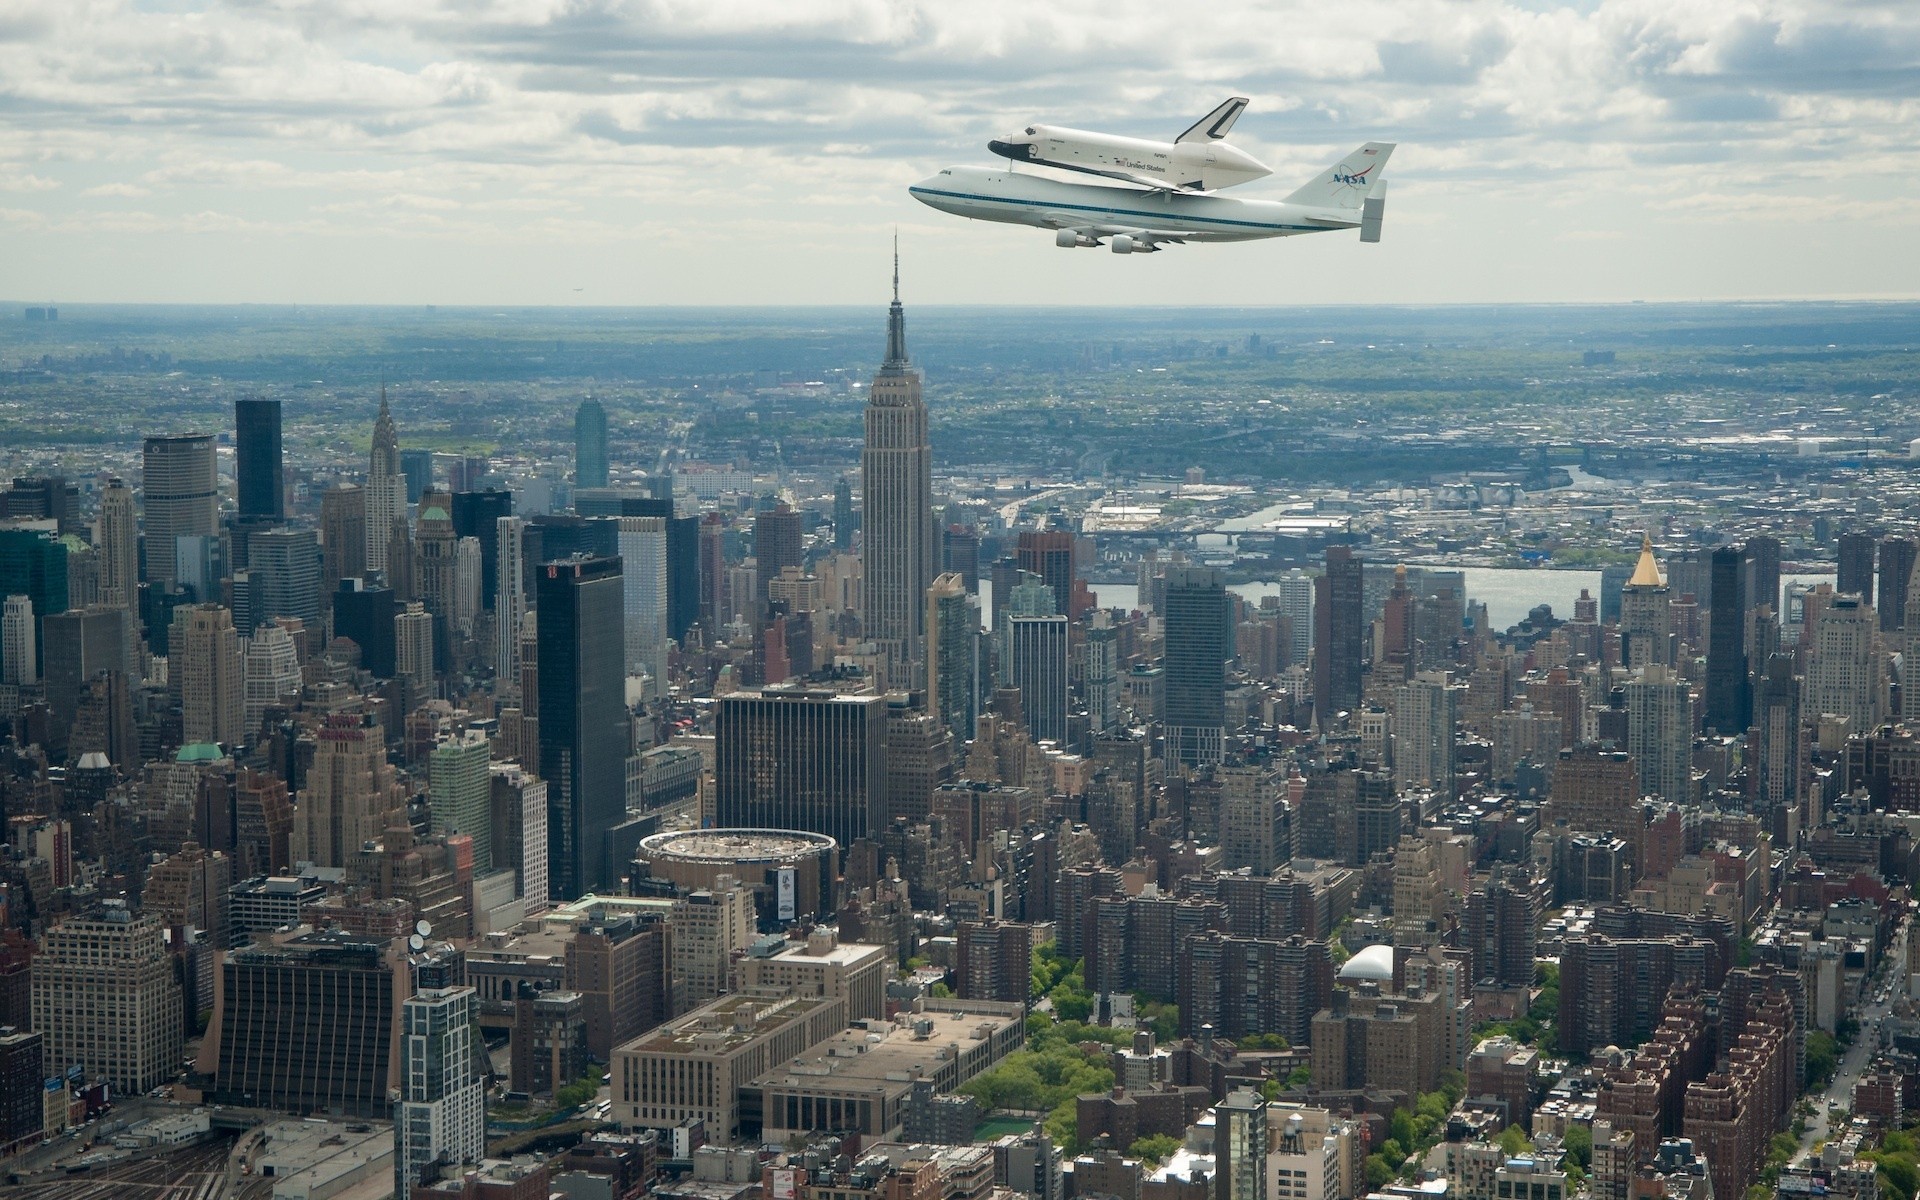 Cityscape City Space Shuttle NASA Boeing Boeing 747 New York City Skyscraper Airplane Aircraft 1920x1200